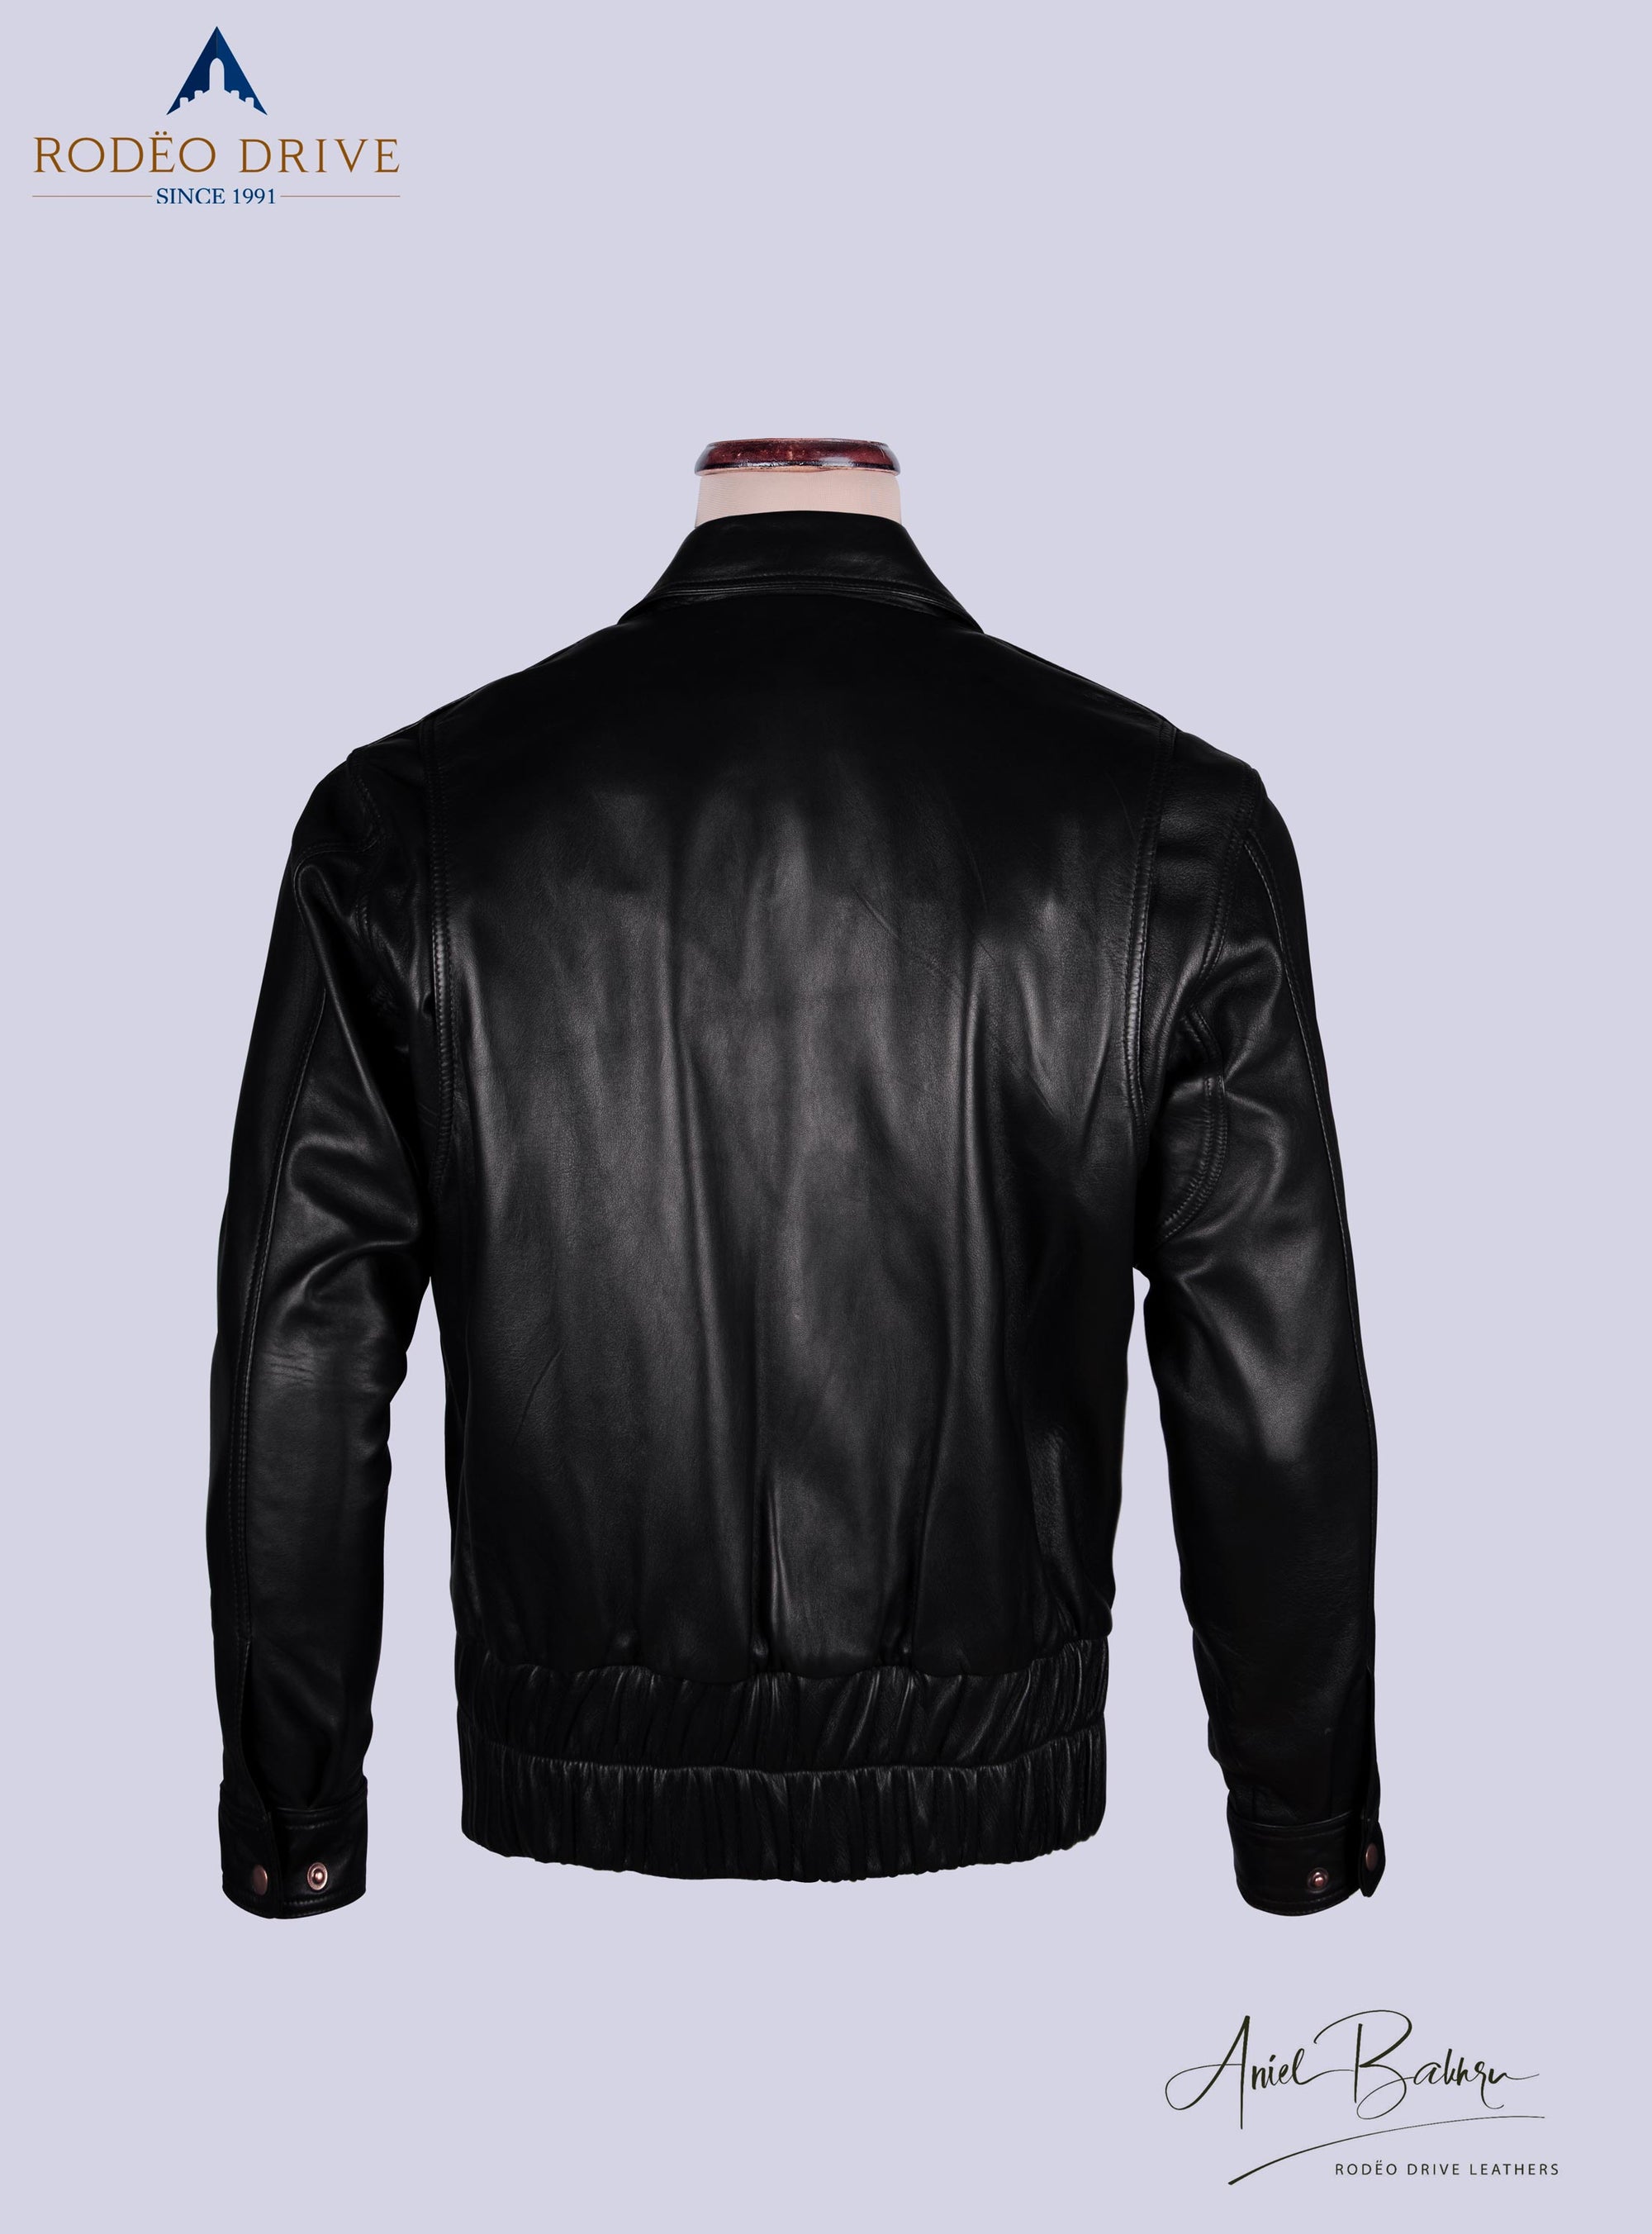 All Airlines leather jacket for womens jackets back look 